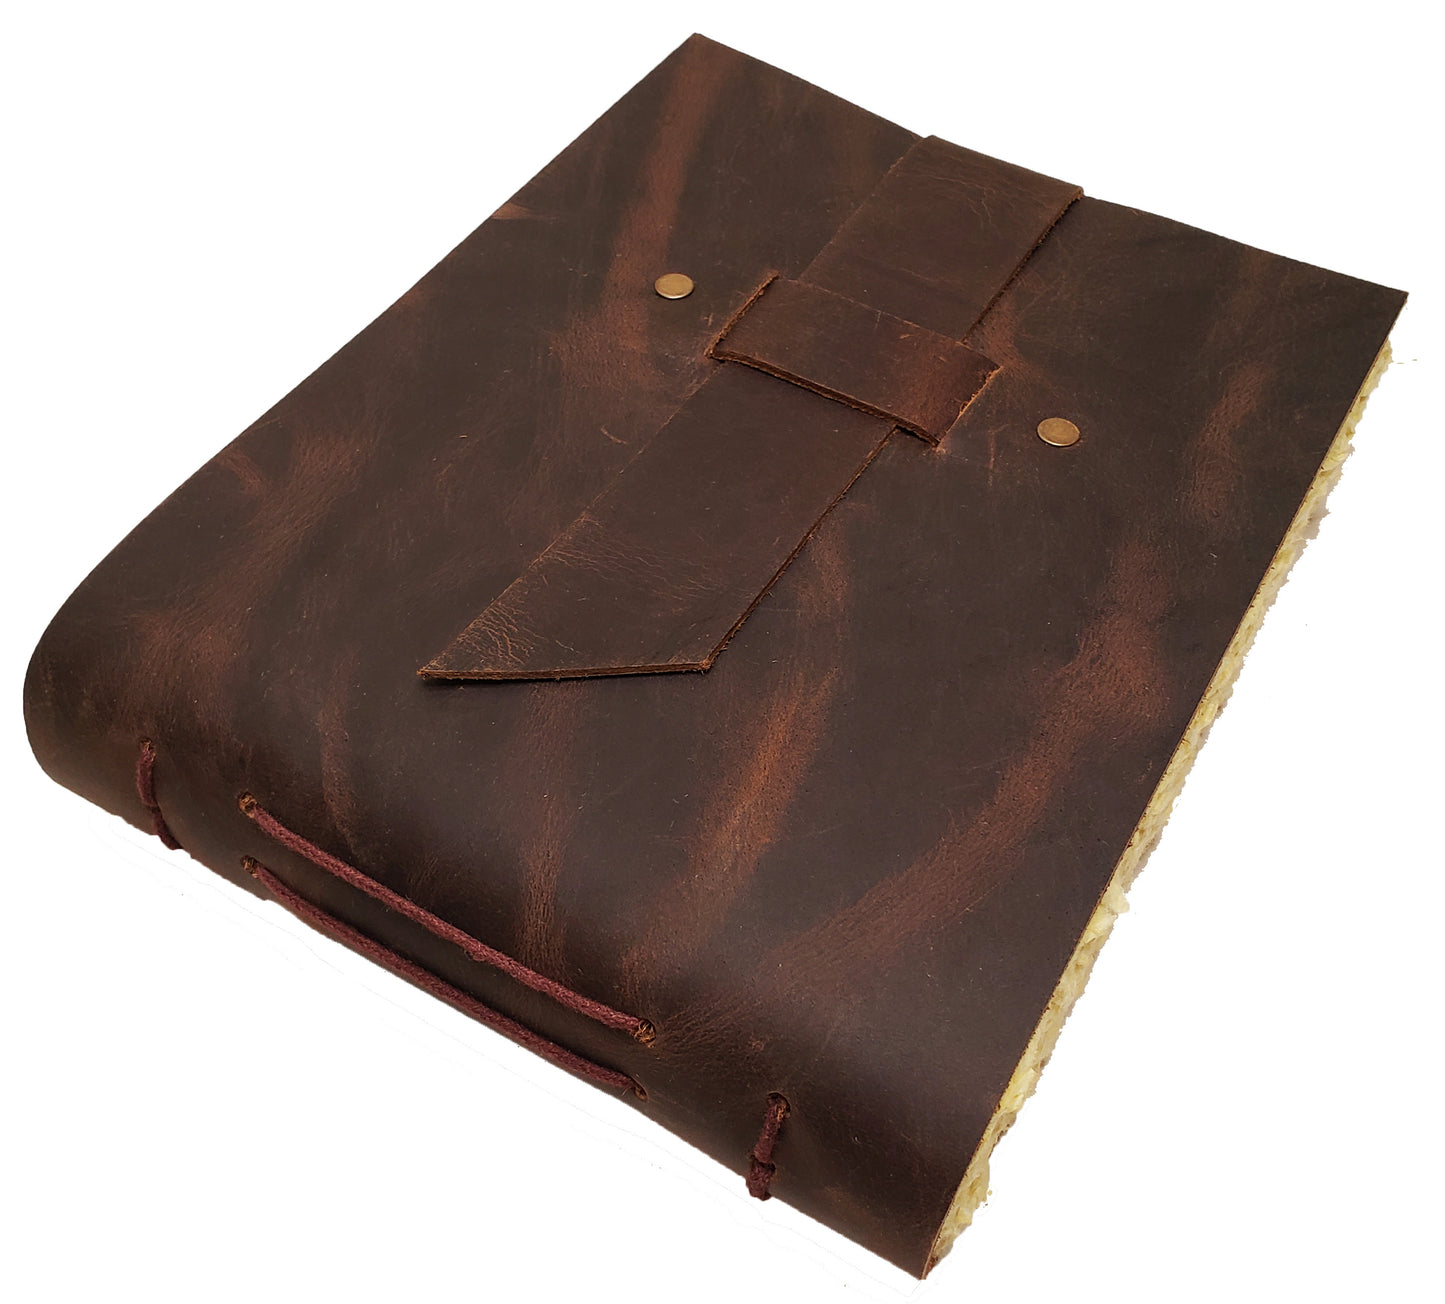 Rustic Vintage Leather Scrapbook Photo Album with Gift Box - Holds 100 4x6 or 5x7 Photos - 6x8"